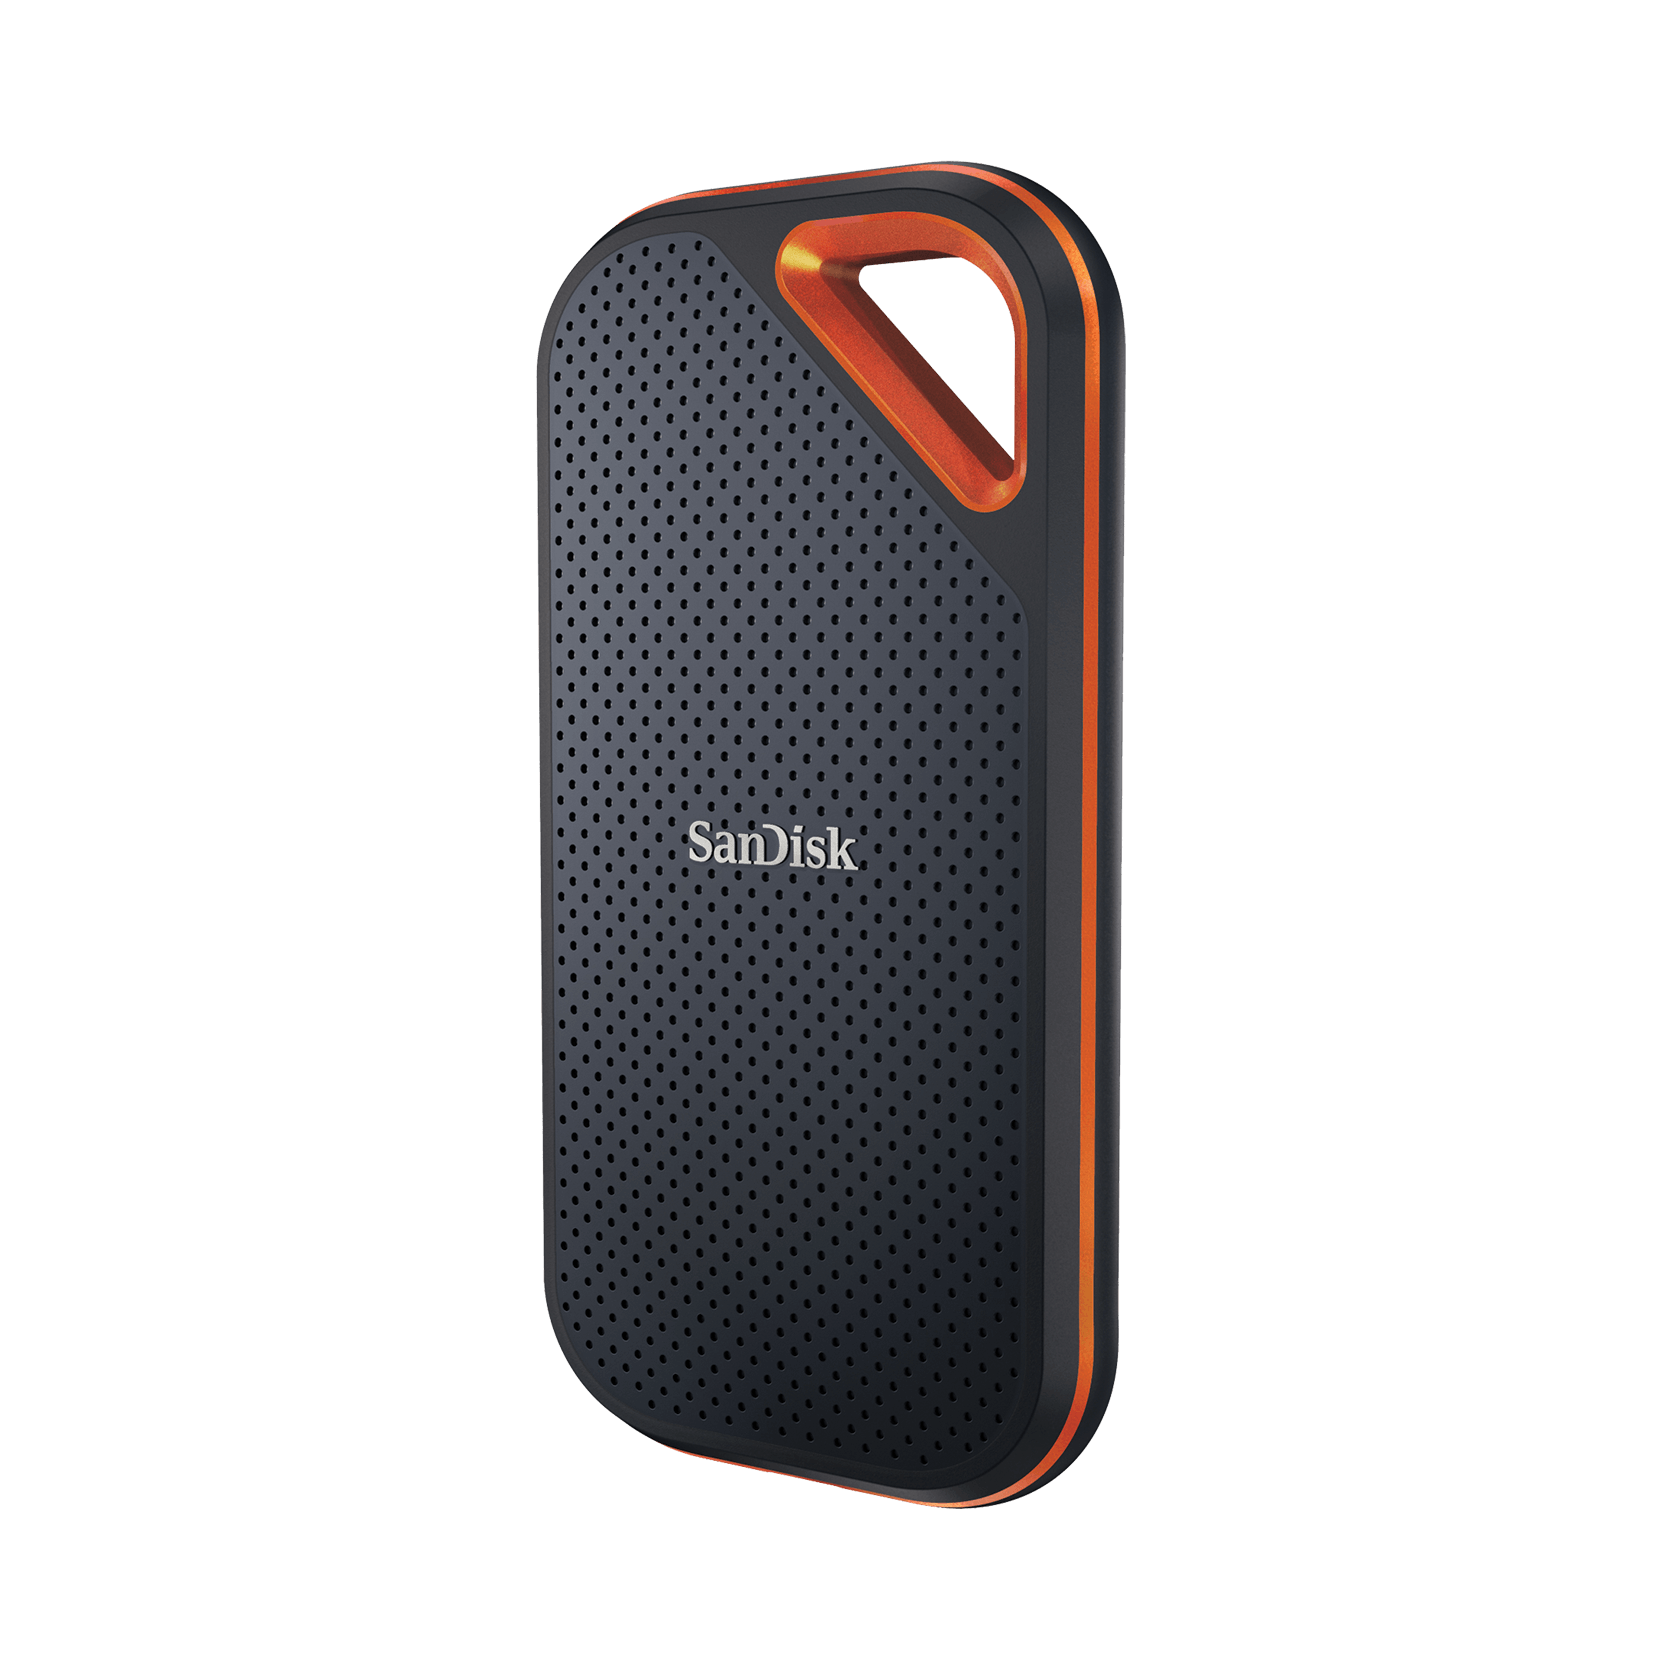 SanDisk Extreme PRO Portable SSD V2, 2TB 2000MB/s E81 USB 3.1 for Windows & Mac Type-C Type-A IP55 Dust and Water-Resistant